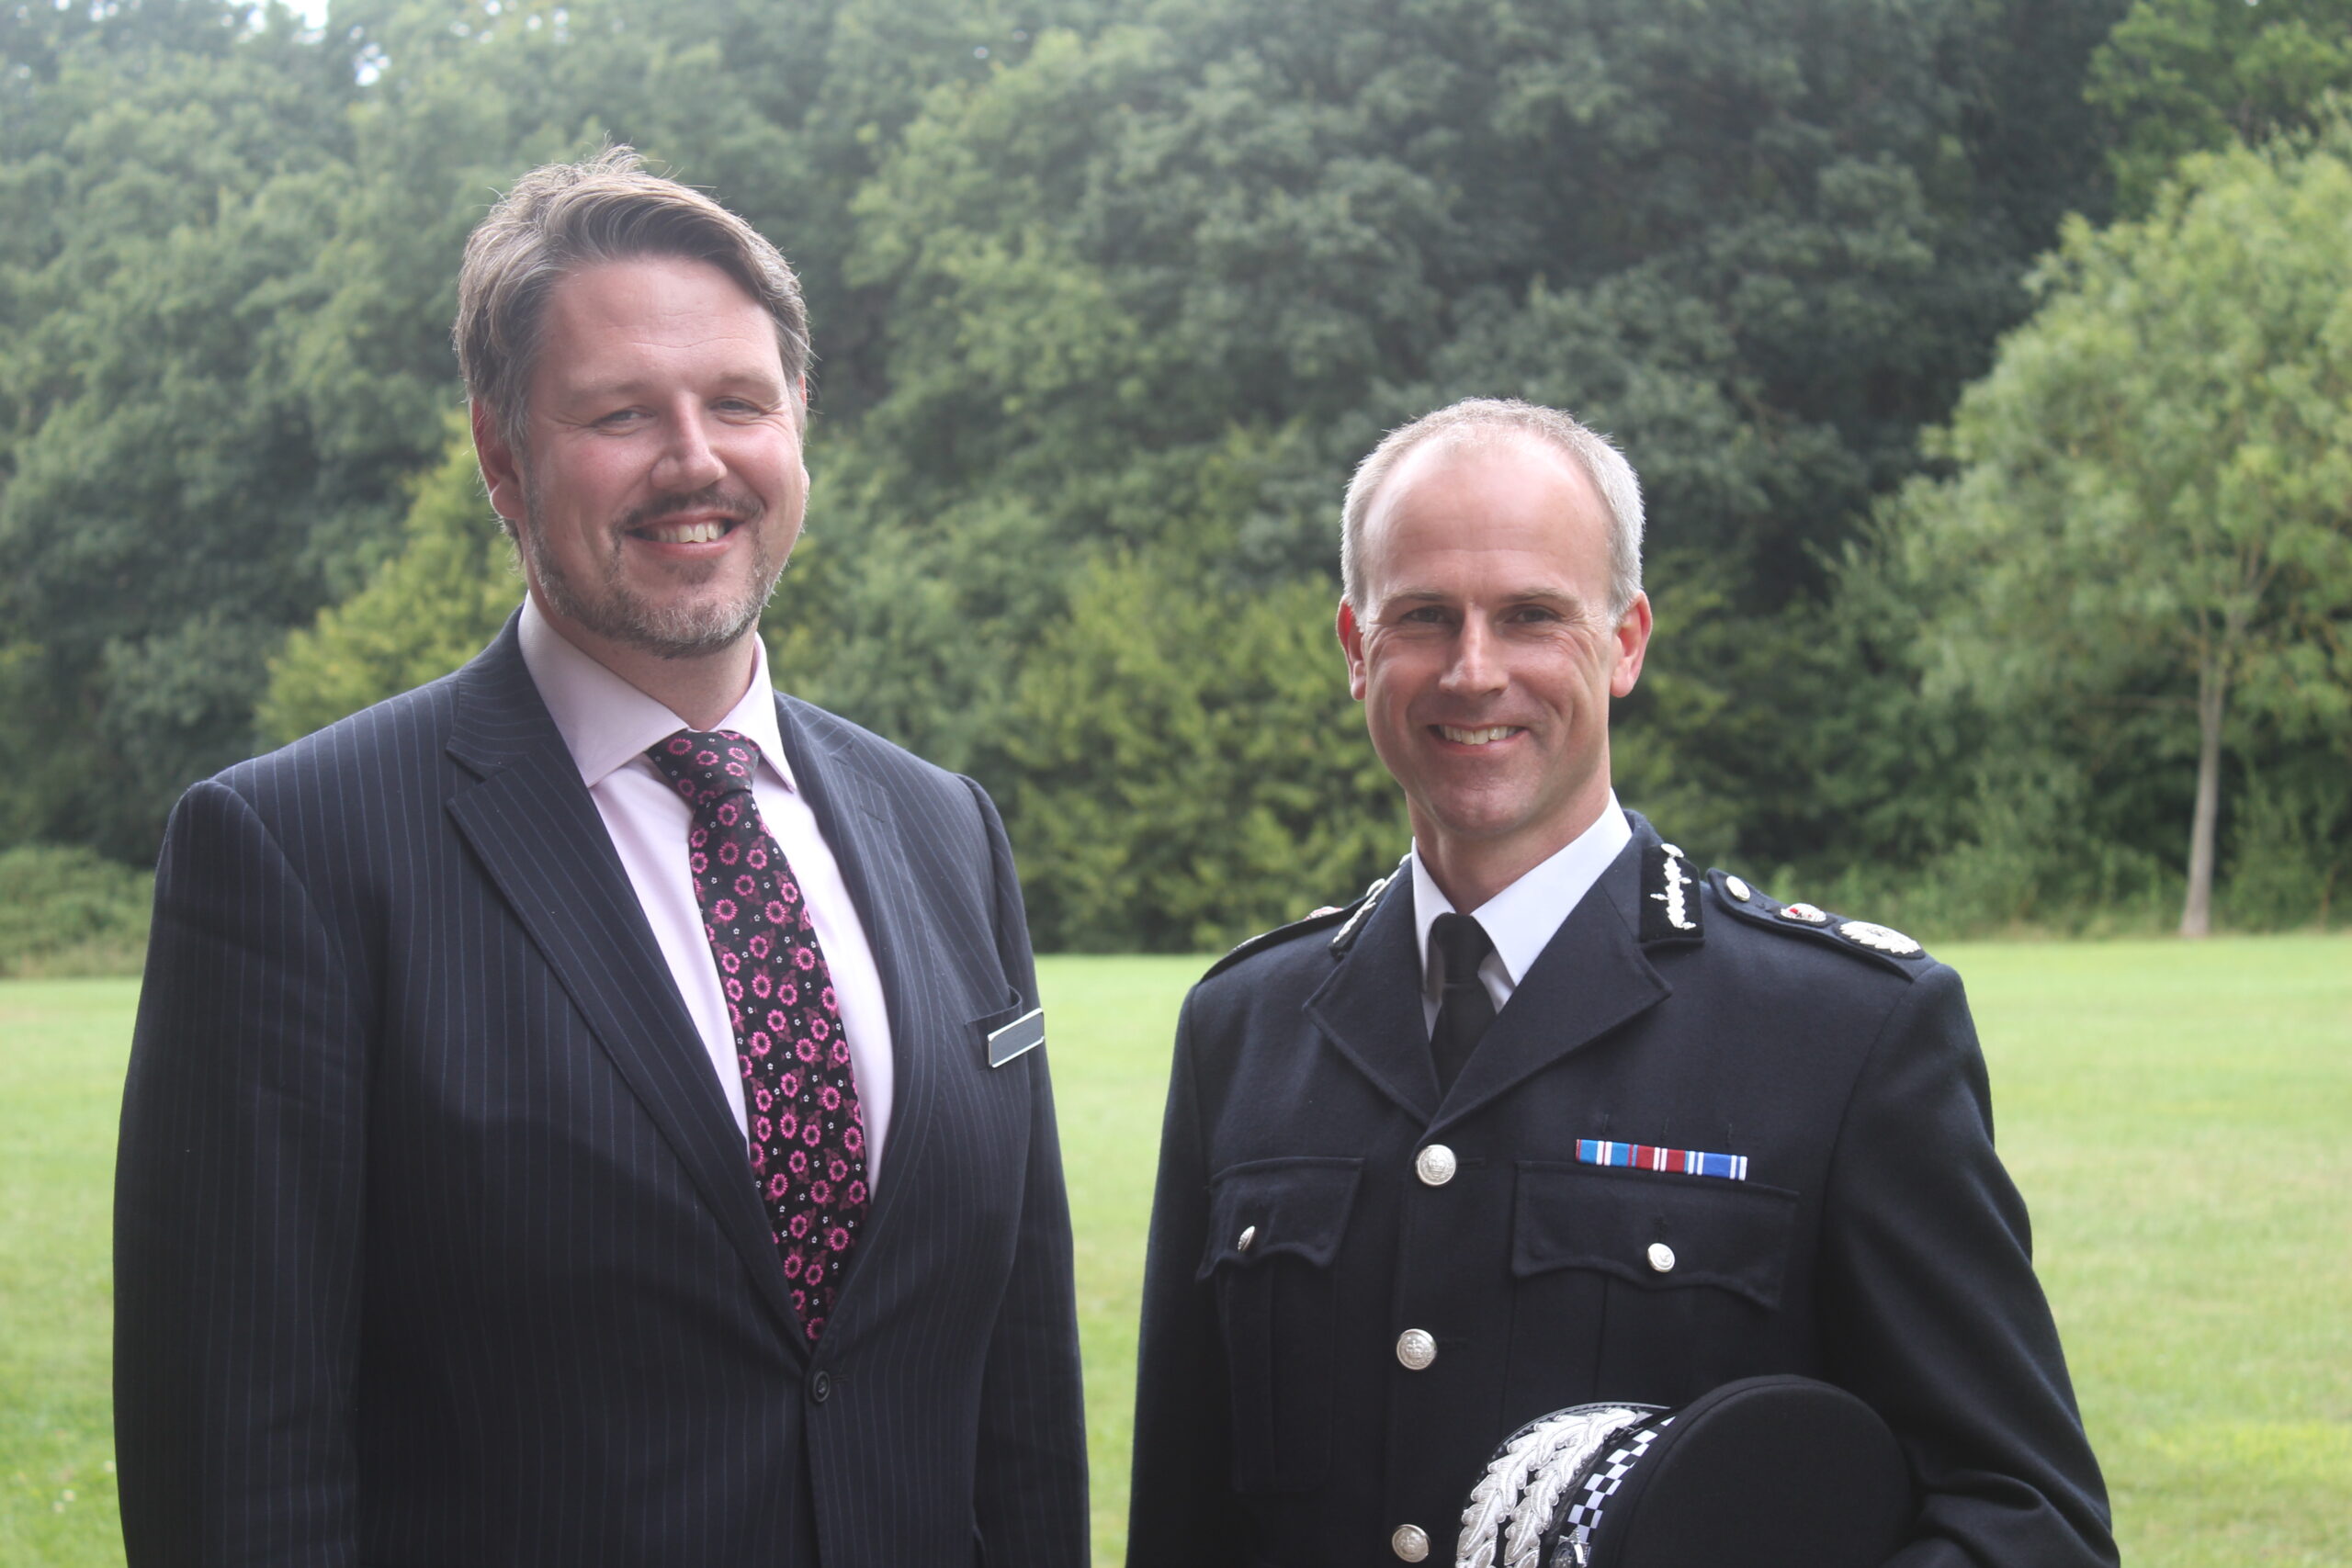 Pcc Announces 100 Additional Officers For West Mercia West Mercia Police Crime Commissioner 